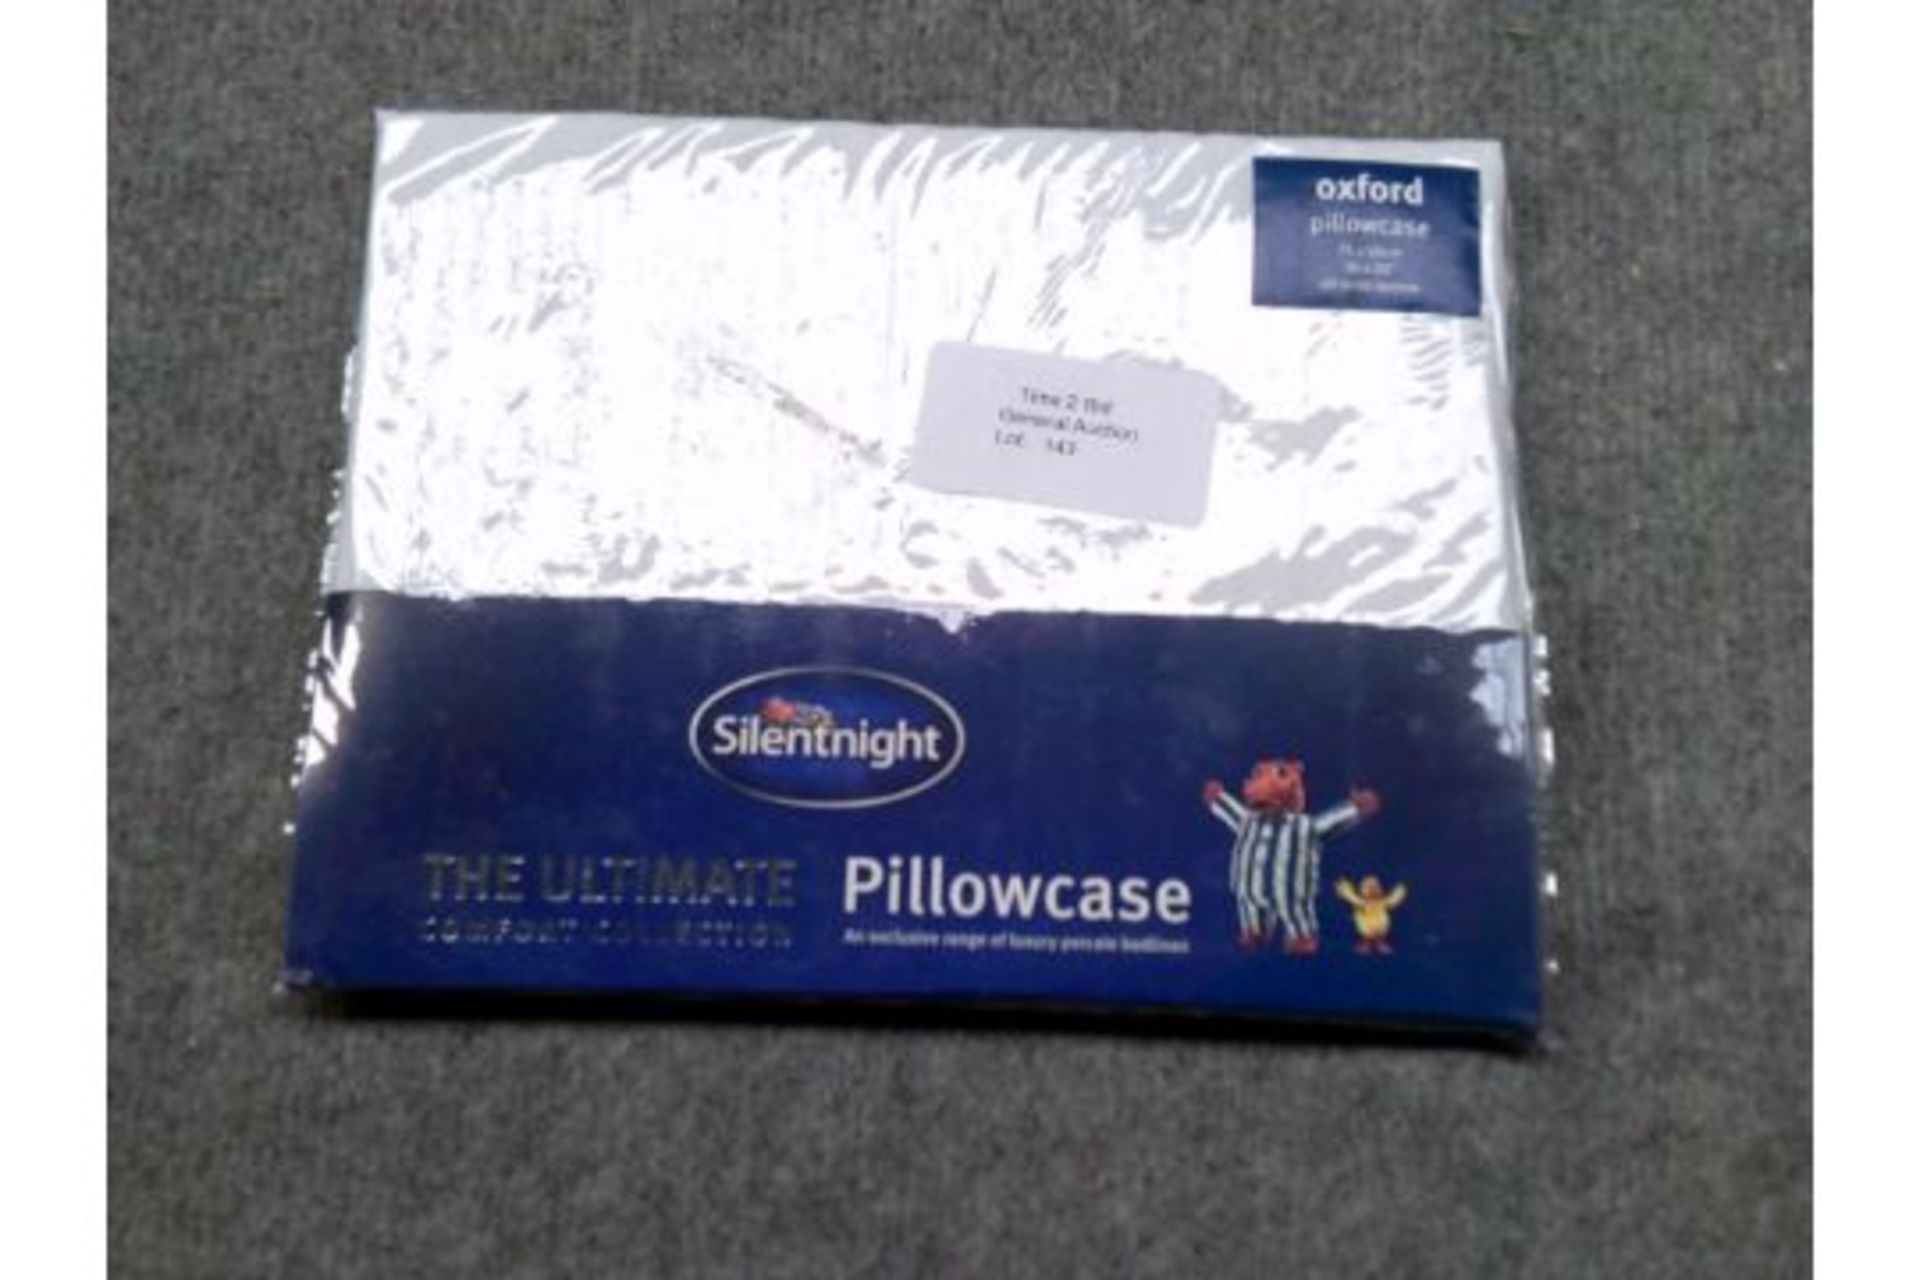 Silentnight pillowcase 75 x 50cm (Delivery Band A)